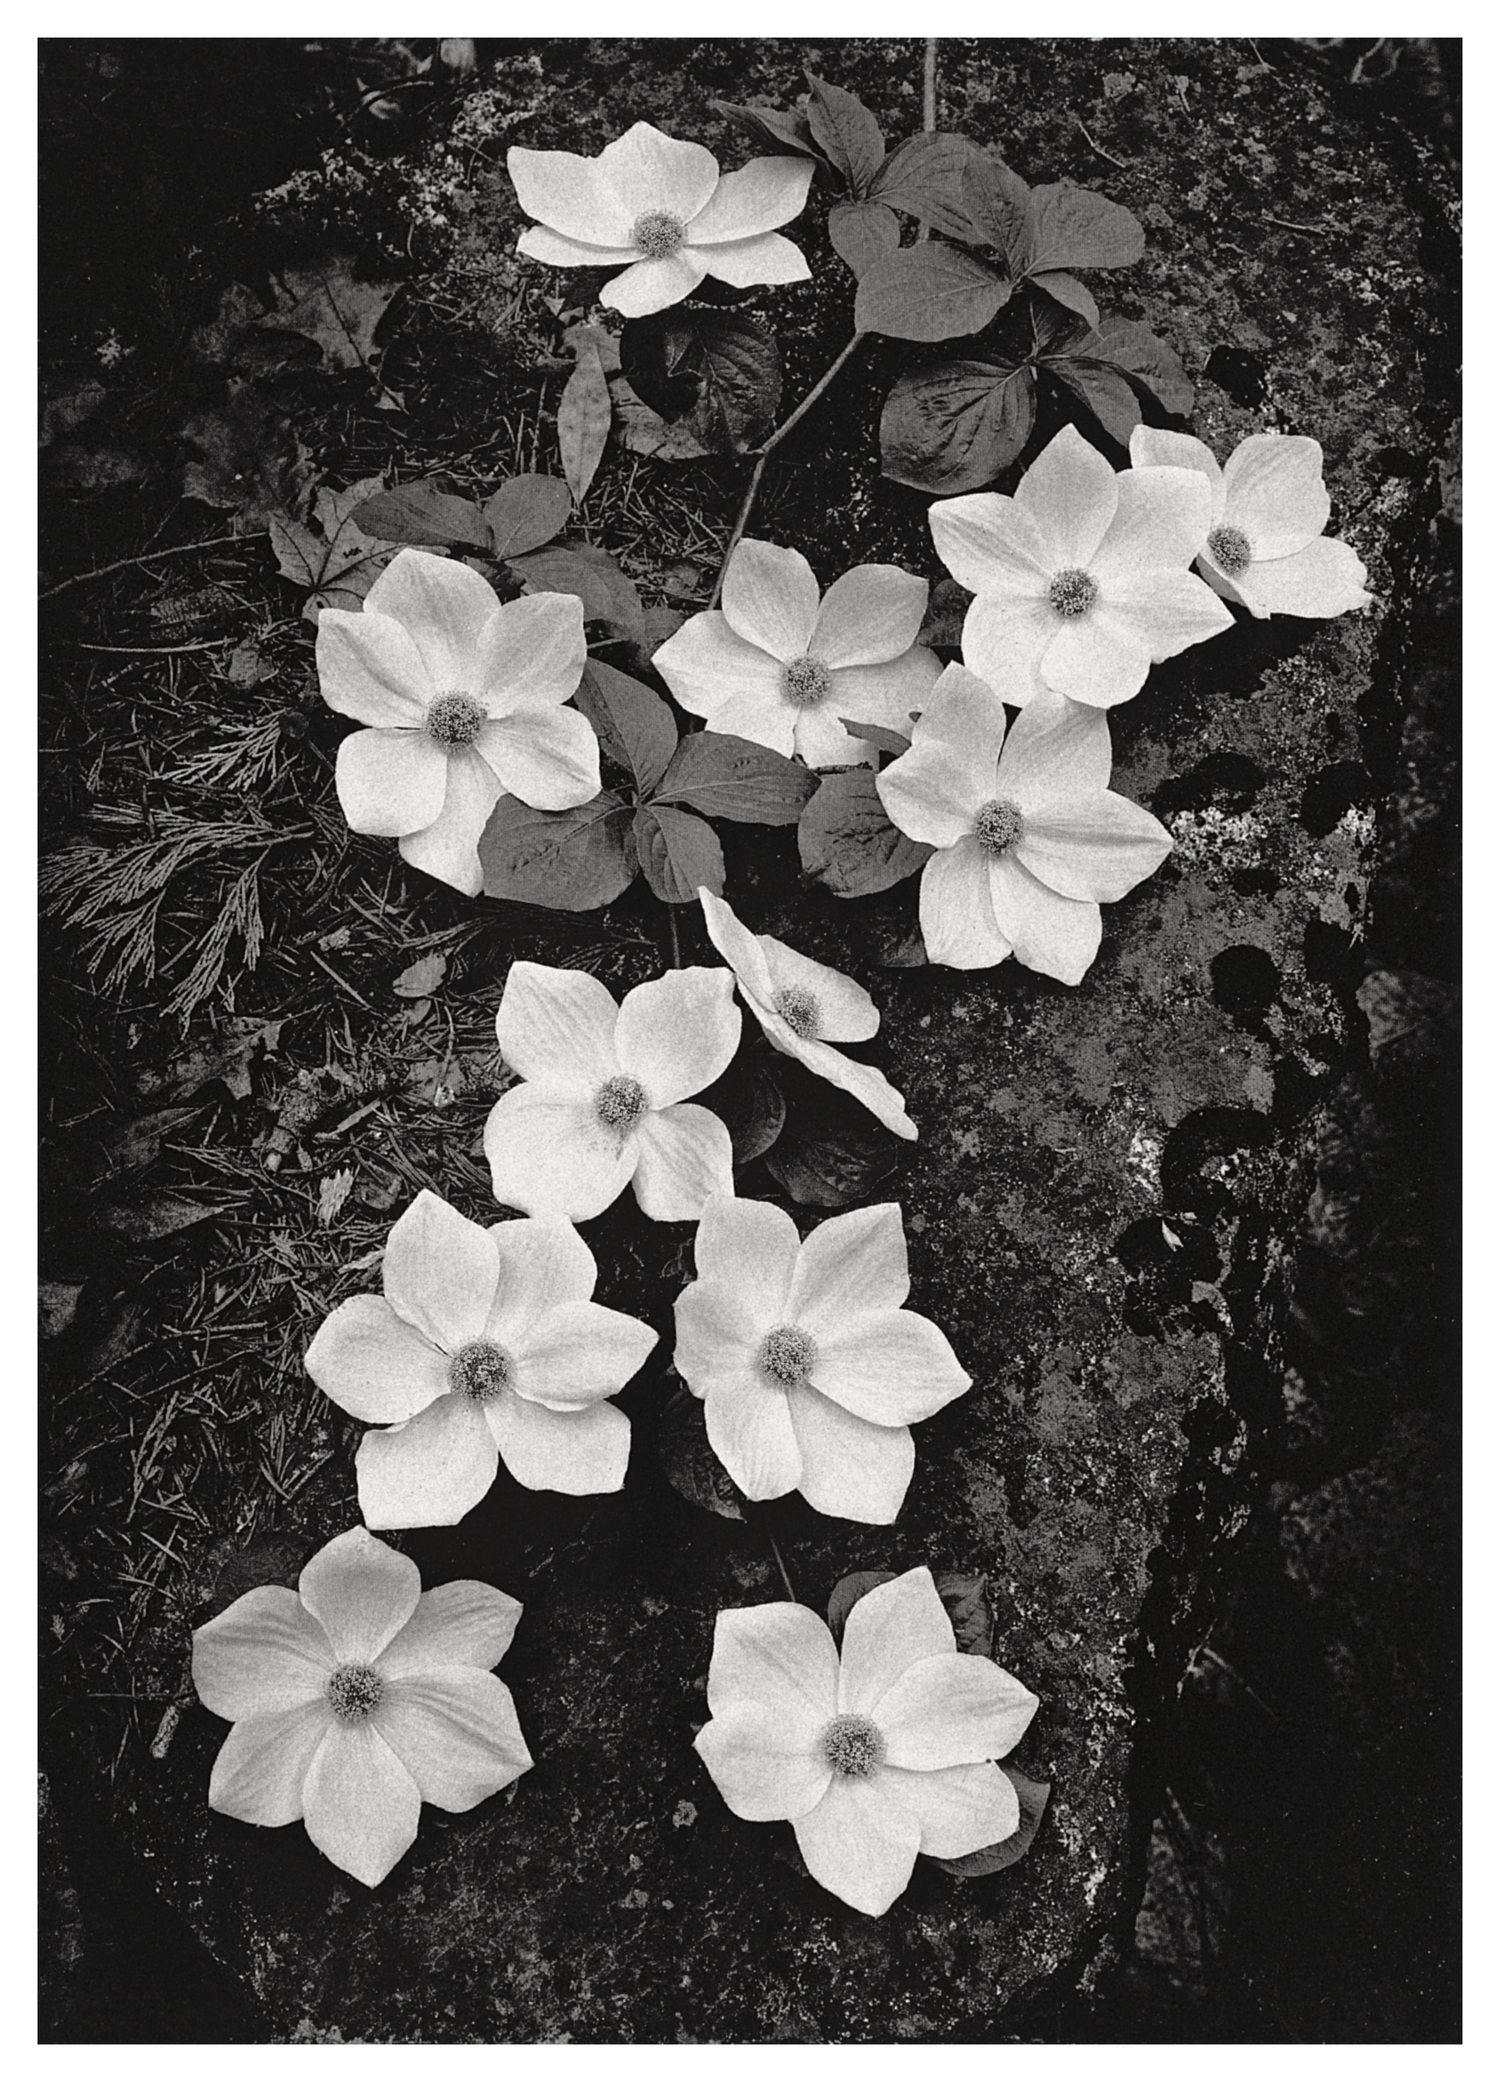 DOGWOOD BLOSSOMS - ANSEL ADAMS SMALL MATTED REPRODUCTION